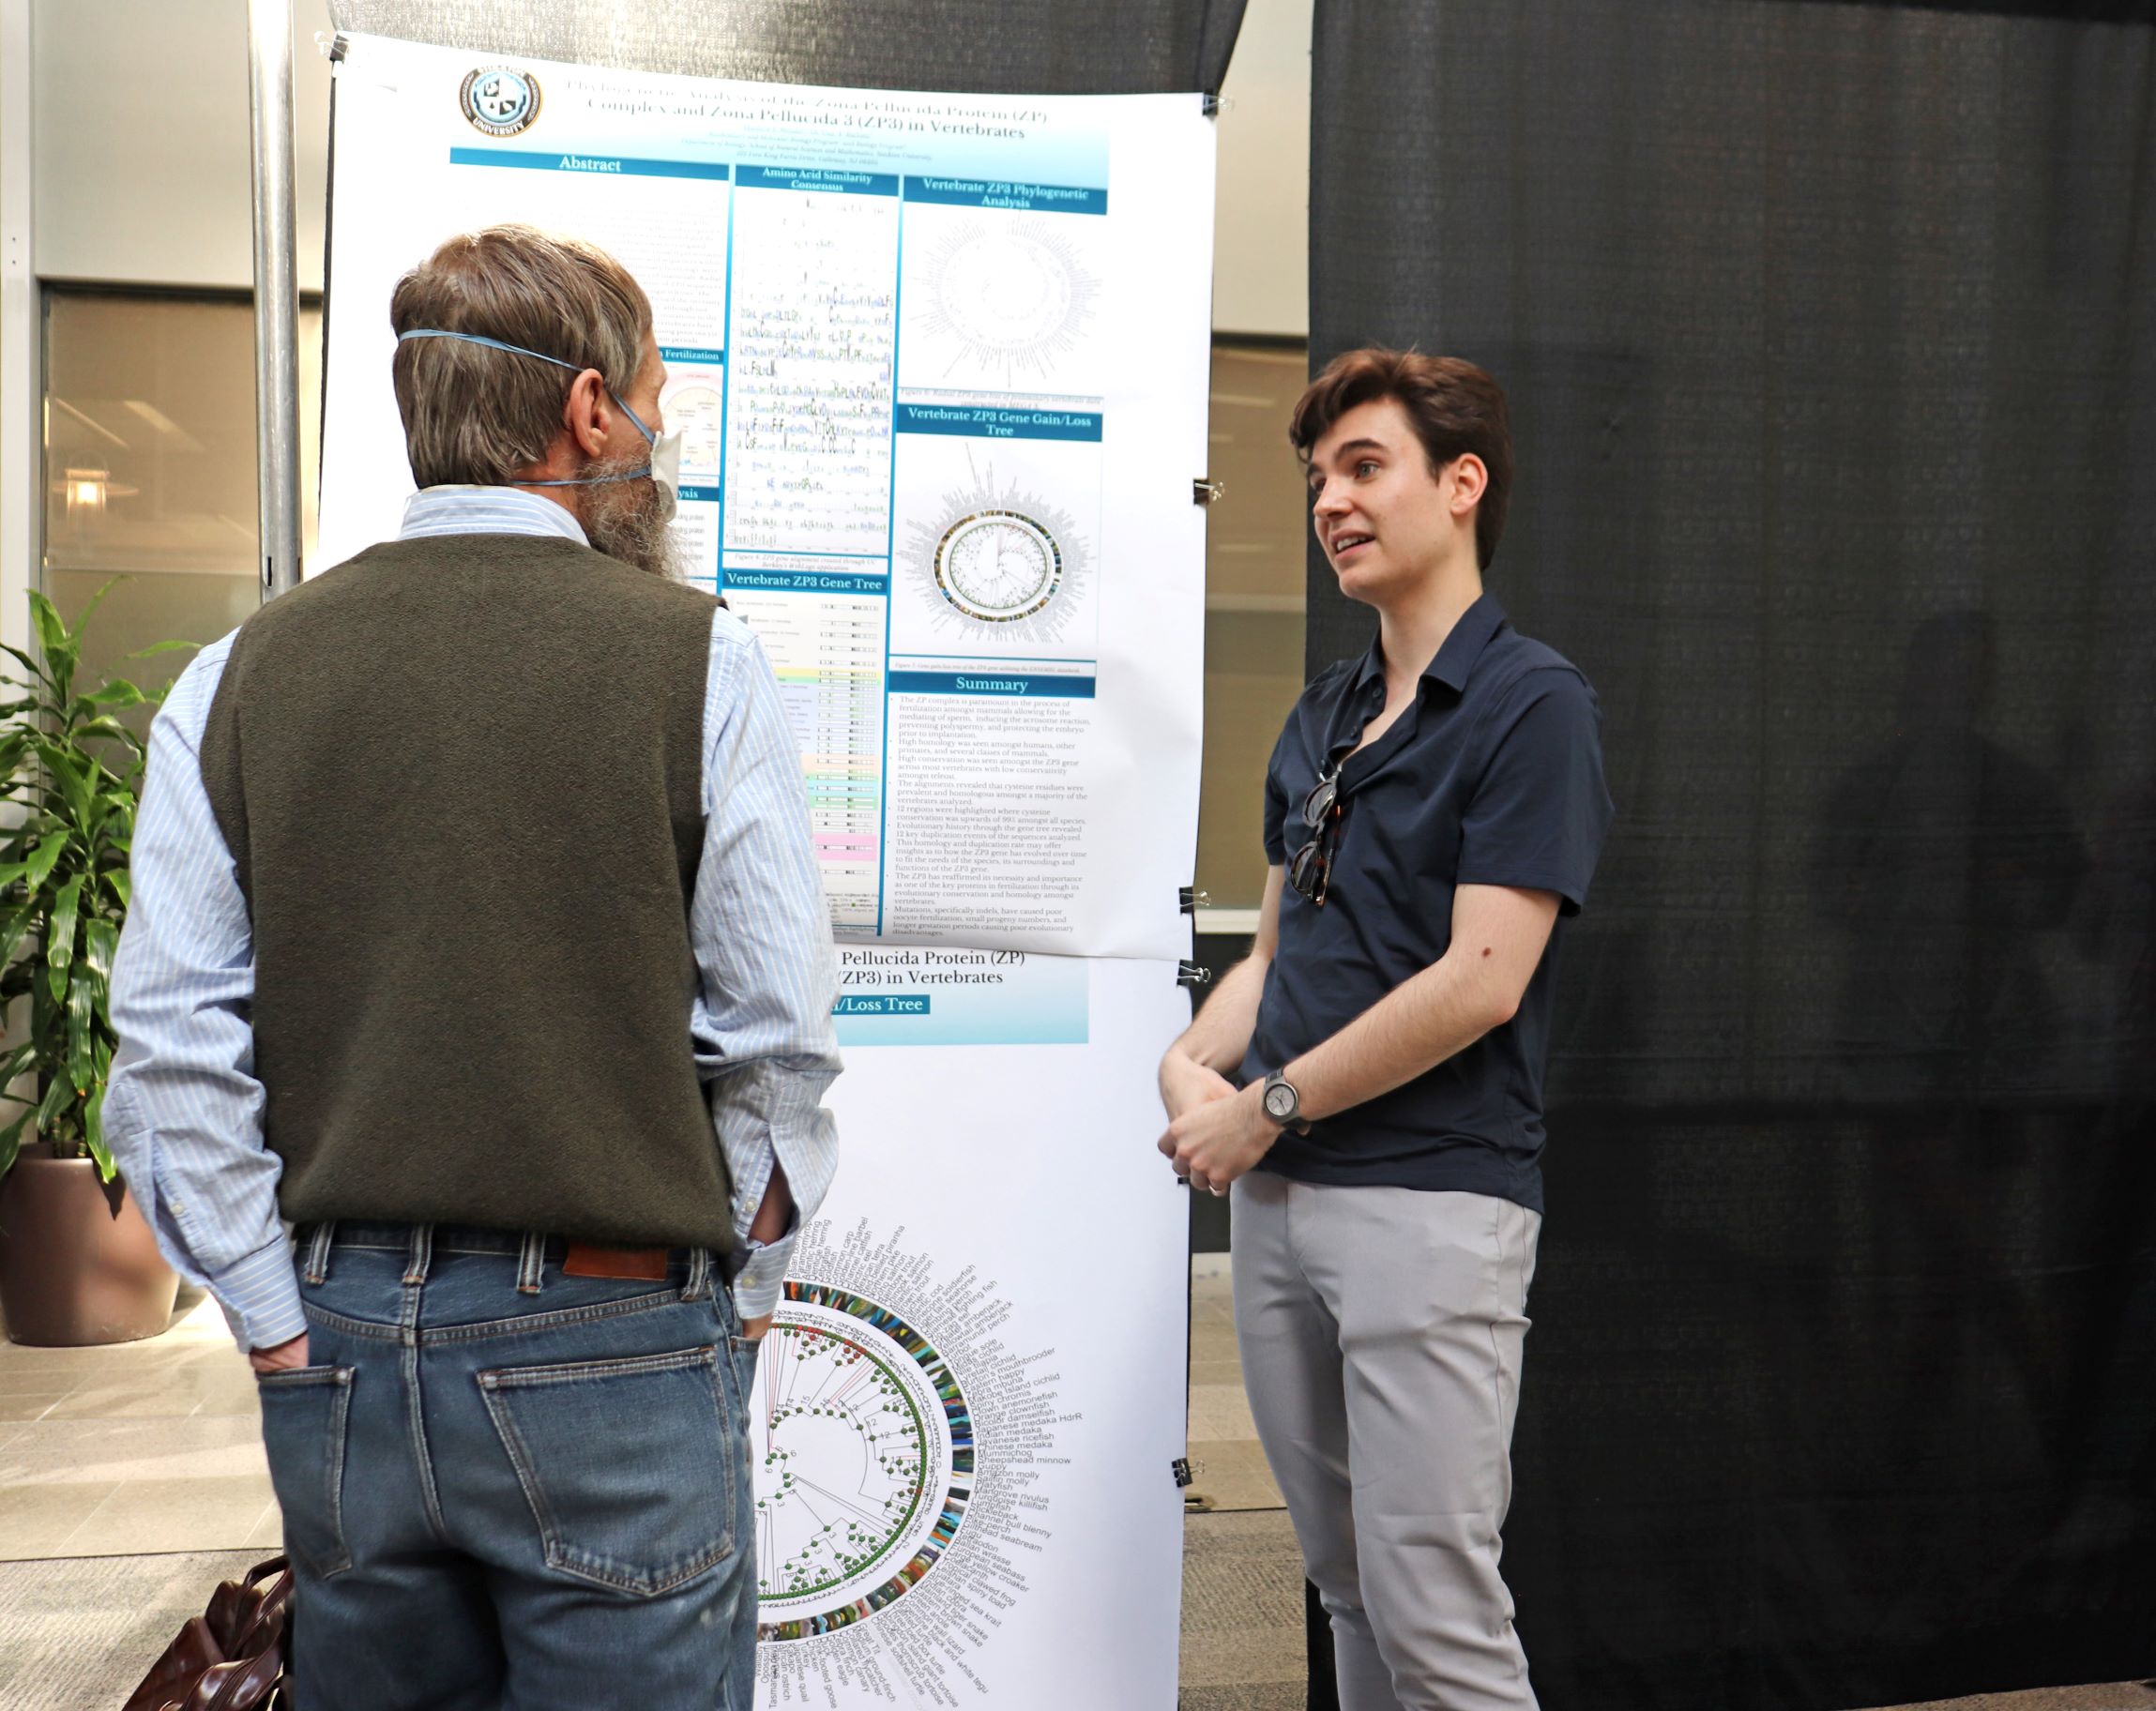 Matthew Metzler was an honorable mention in the NAMS Symposium on April 22. He stands in front of his project and chats with a faculty member.